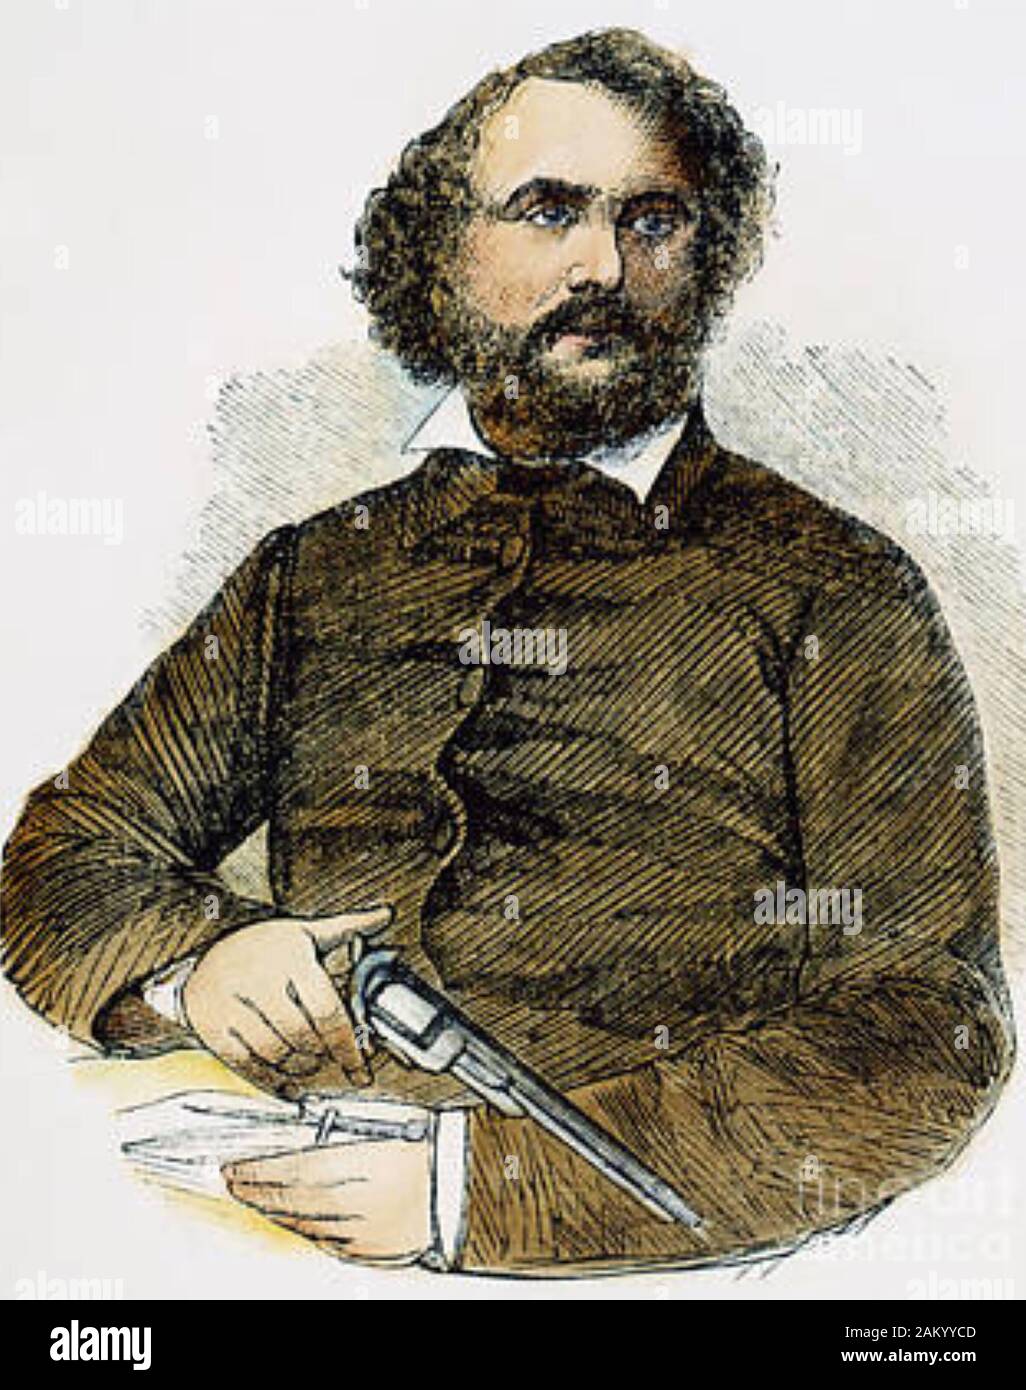 SAMUEL COLT (1814-1862) American inventor and industrialist, founder of the  fire-arms company named after him Stock Photo - Alamy